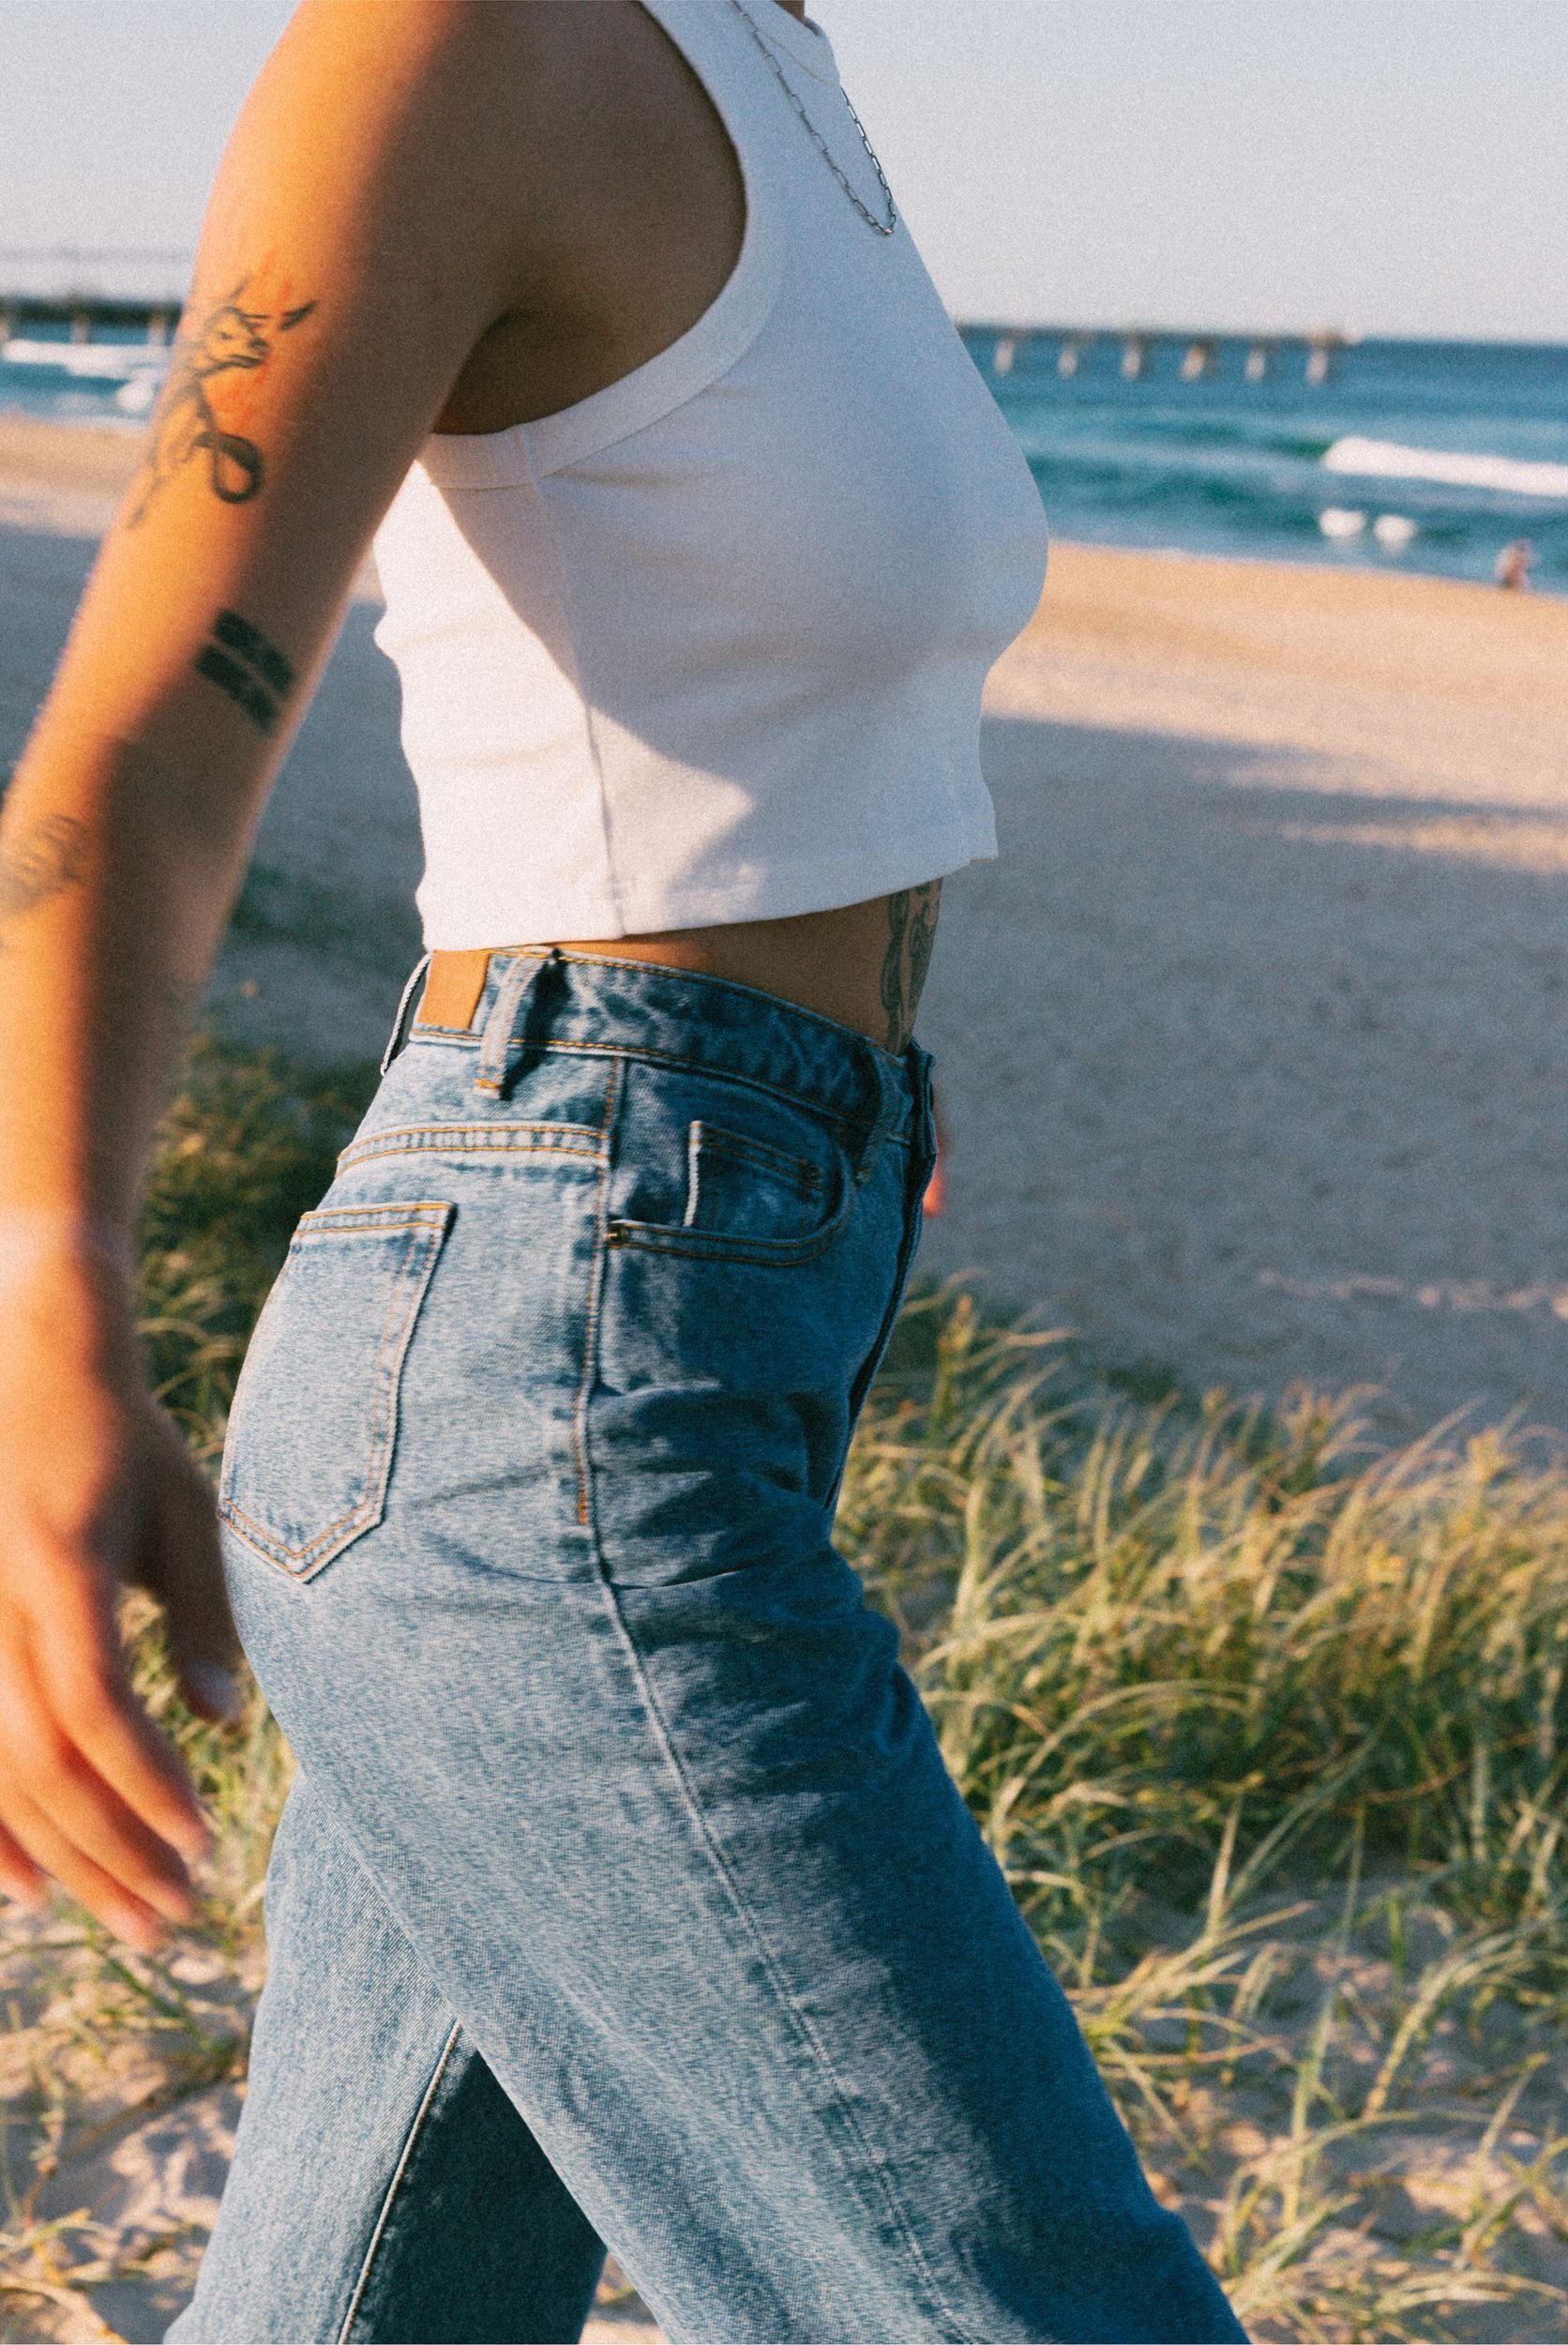 BAGGY Weite Sea HIGH - Rusty Blue JEAN Jeans